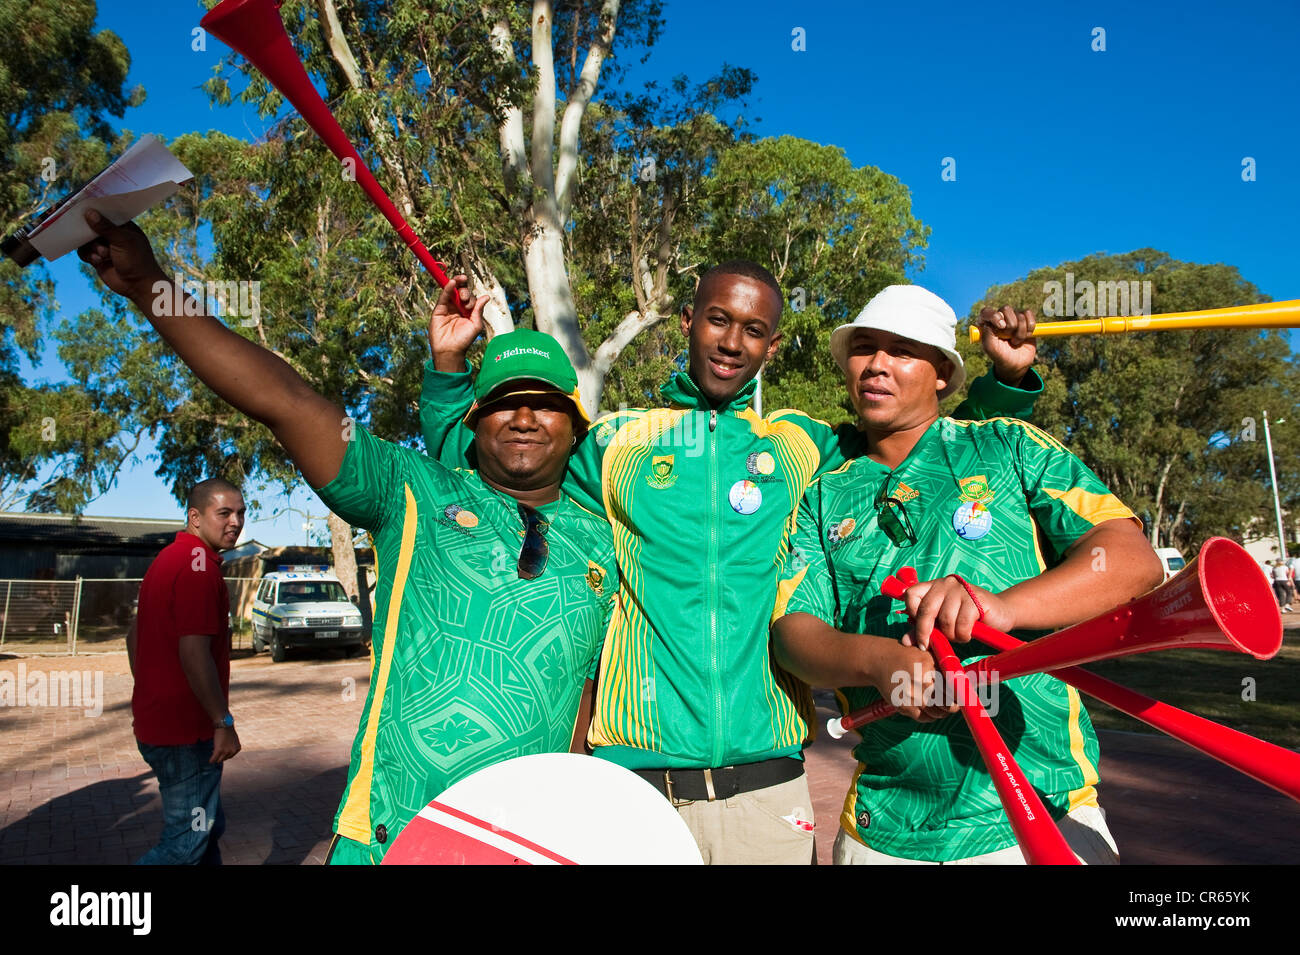 South Africa, Western Cape, Cape Town, football fans coming out of the stadium Stock Photo